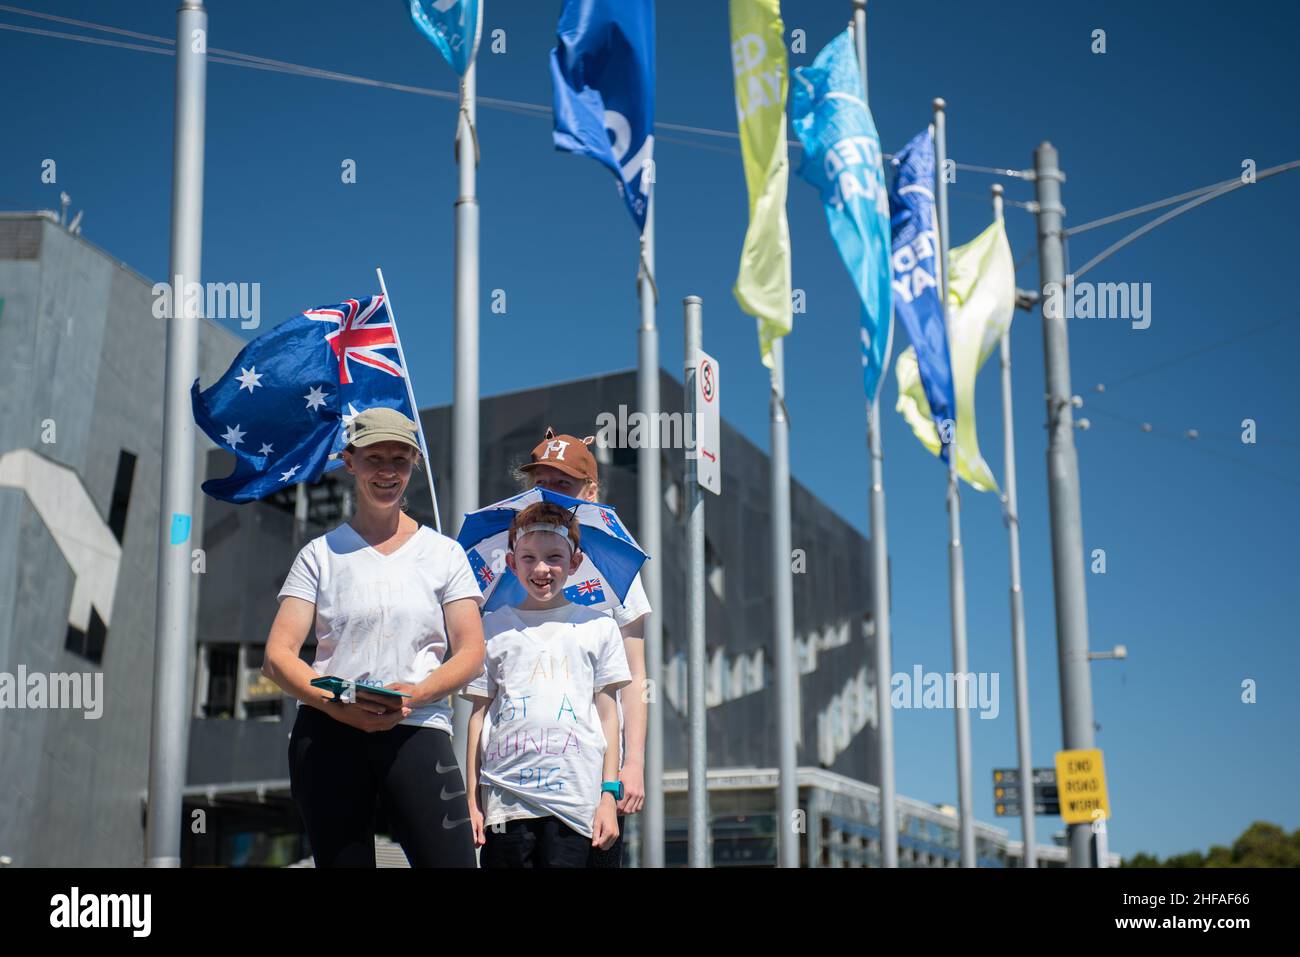 Melbourne, Australia. 15th Jan, 2022. 15th January 2022, Melbourne, Australia. A mother and her children pose for a photo in front of Australian Open flags outside Flinders Street Station as part of an anti-vax protest. Credit: Jay Kogler/Alamy Live News Credit: Jay Kogler/Alamy Live News Stock Photo